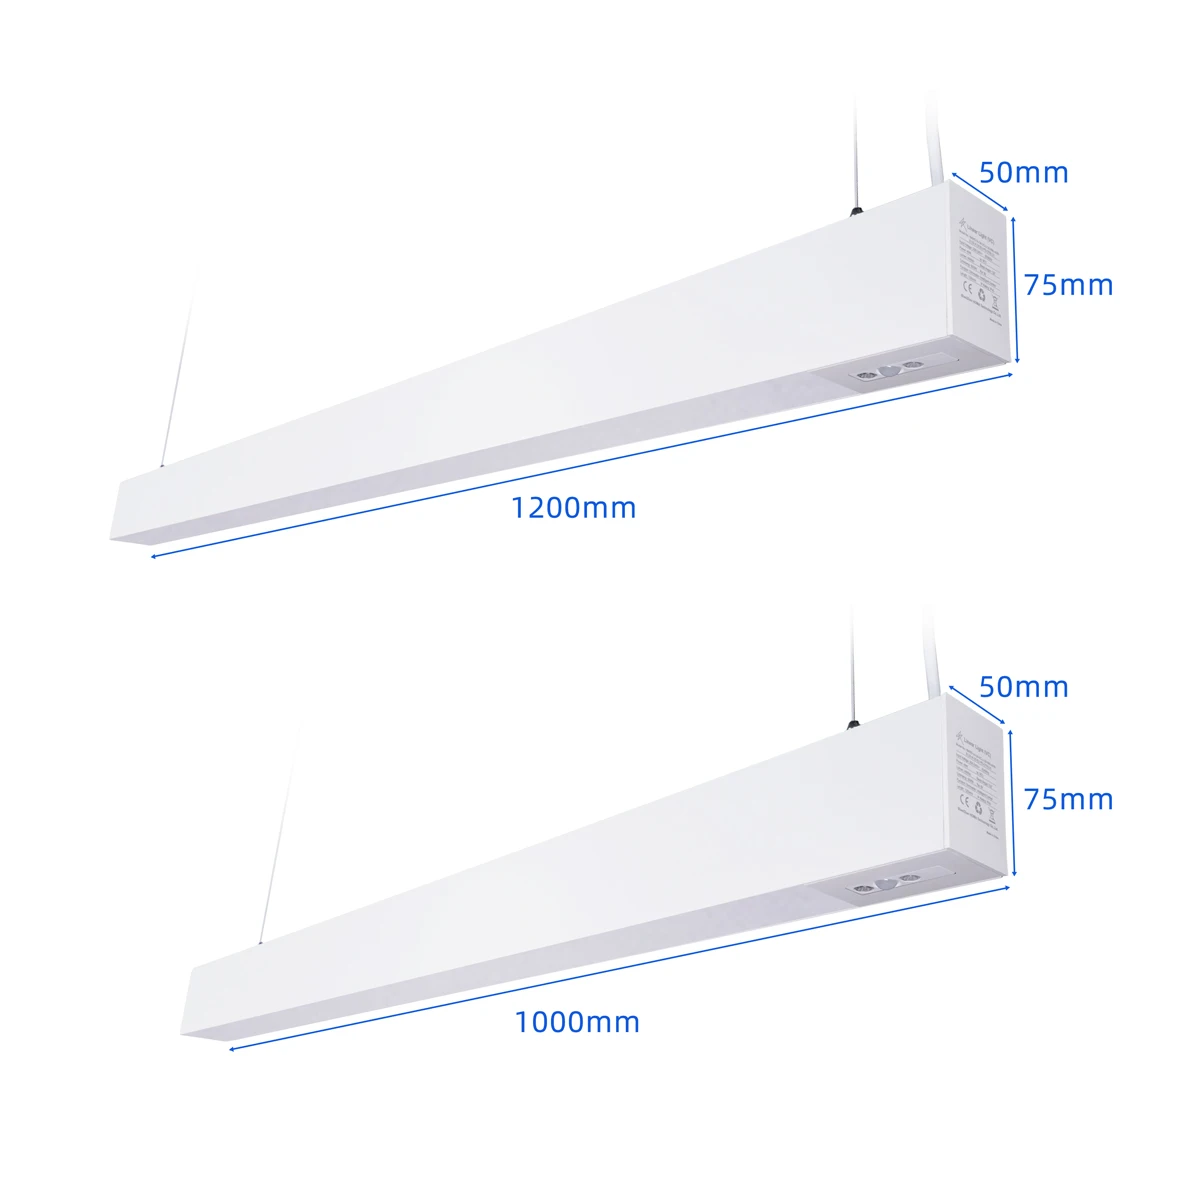 40W Energy-saving Intelligent Dimmable Linear Light 1200mm Office arehouse Light Linear Led Lights